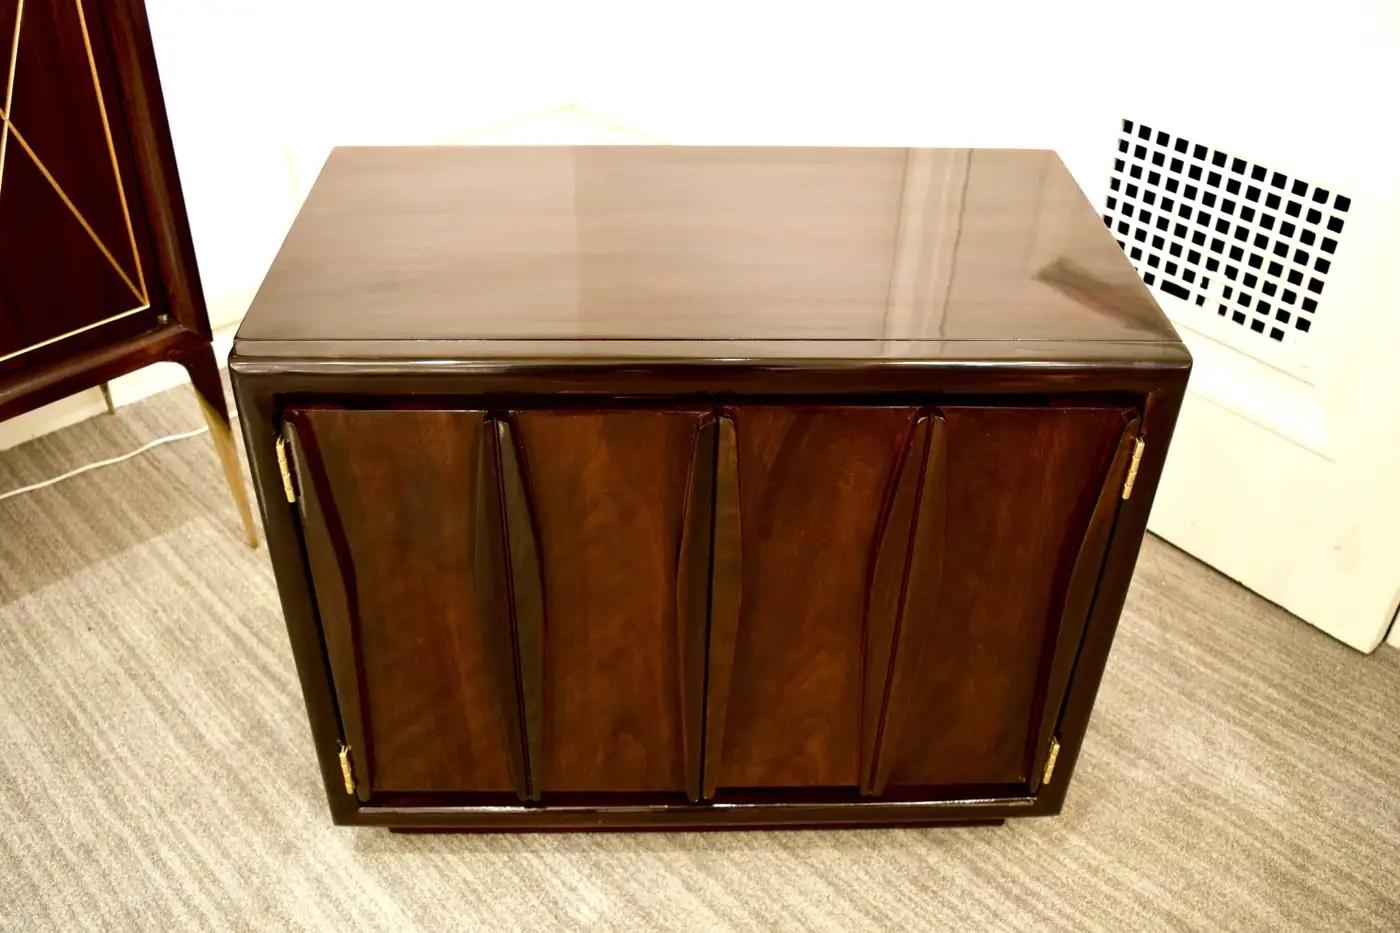 Pair of Mid Century Harvey Probber Style end tables. Beautiful sculpted fronts with two doors opening to a single drawer with open shelf below.  Refinished a few years ago in a contrasting deep dark walnut and medium walnut. Great storage for